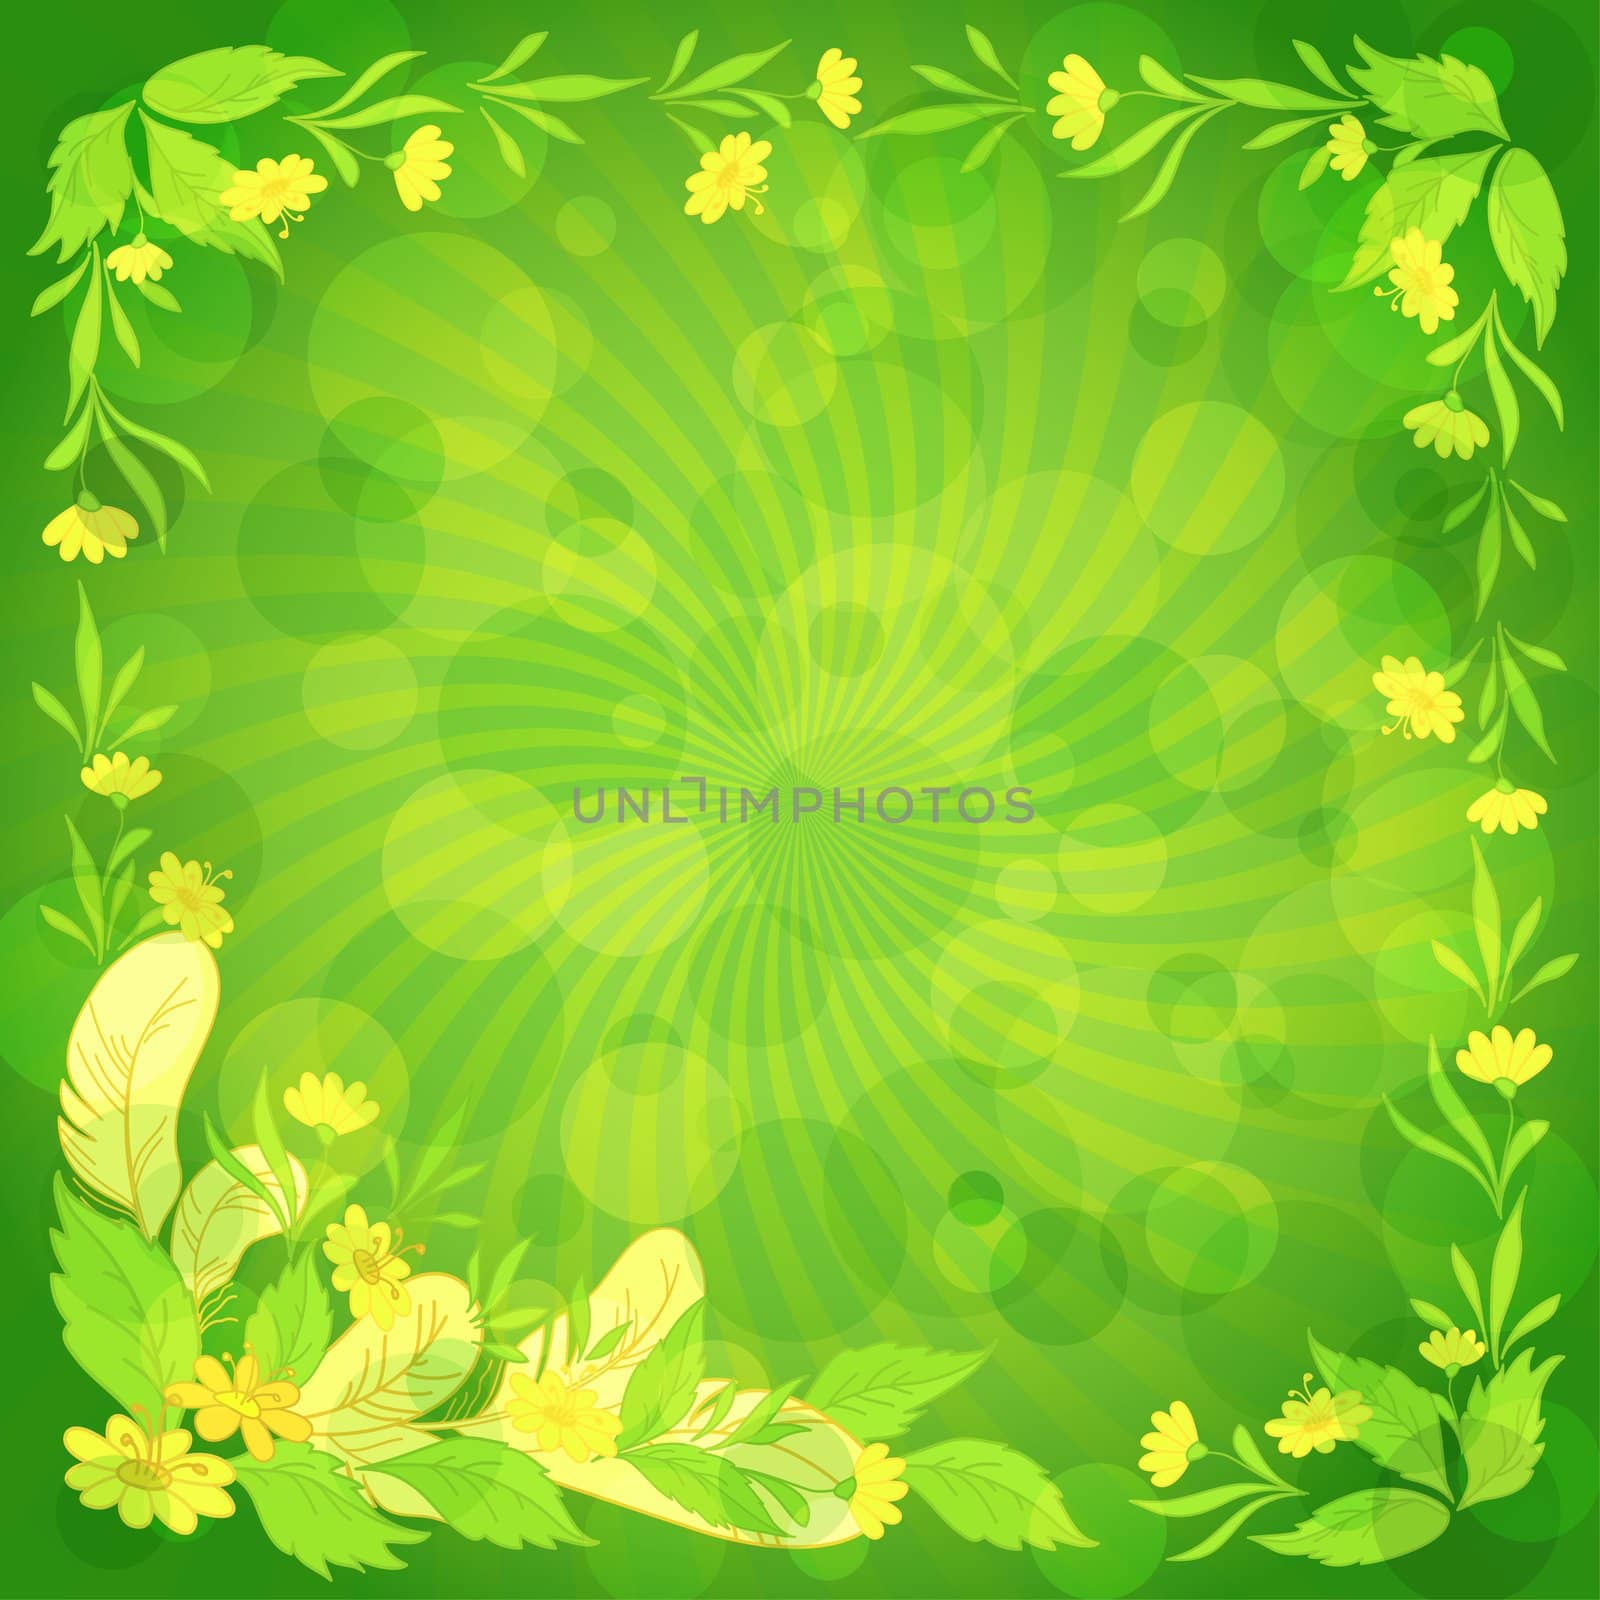 Abstract floral background: leaves, flowers, feathers and circles on green